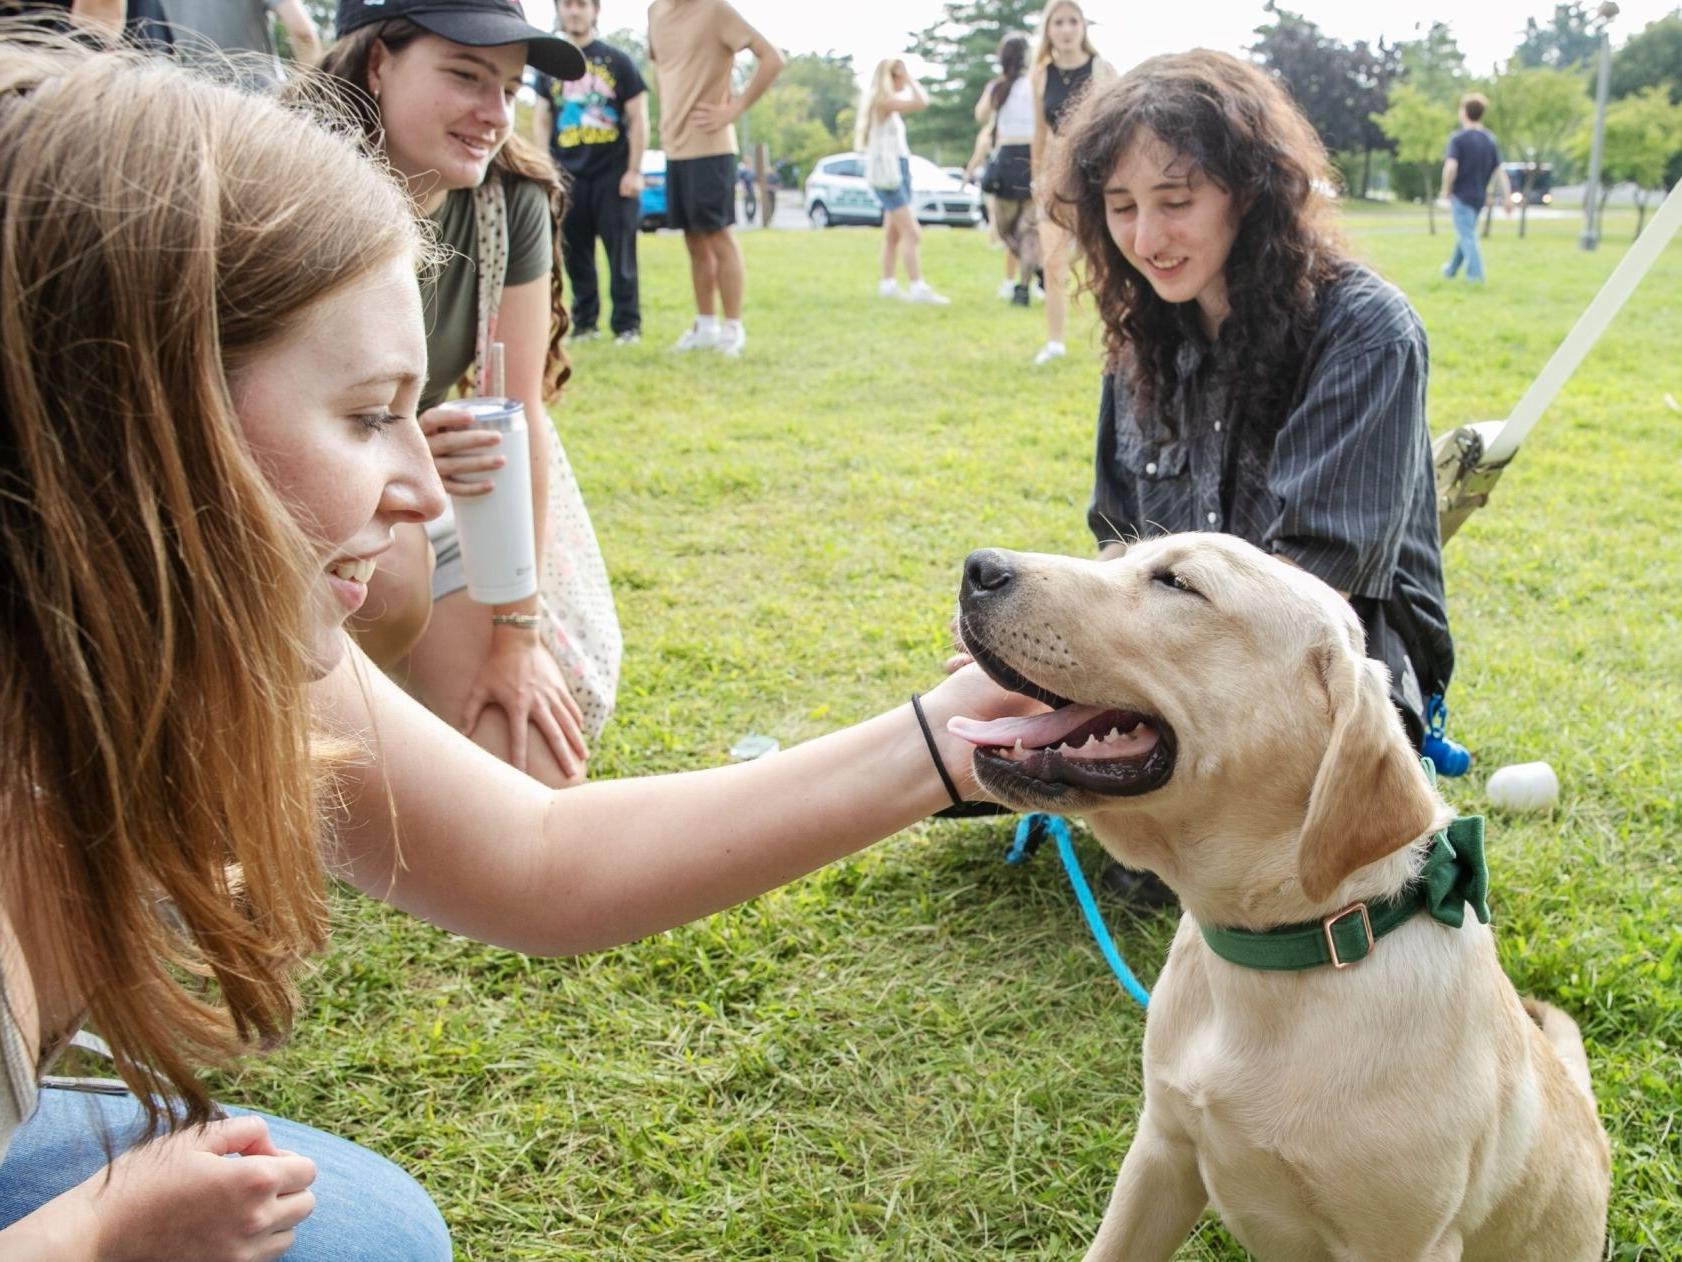 Students pet a lab puppy wearing a green bowtie.